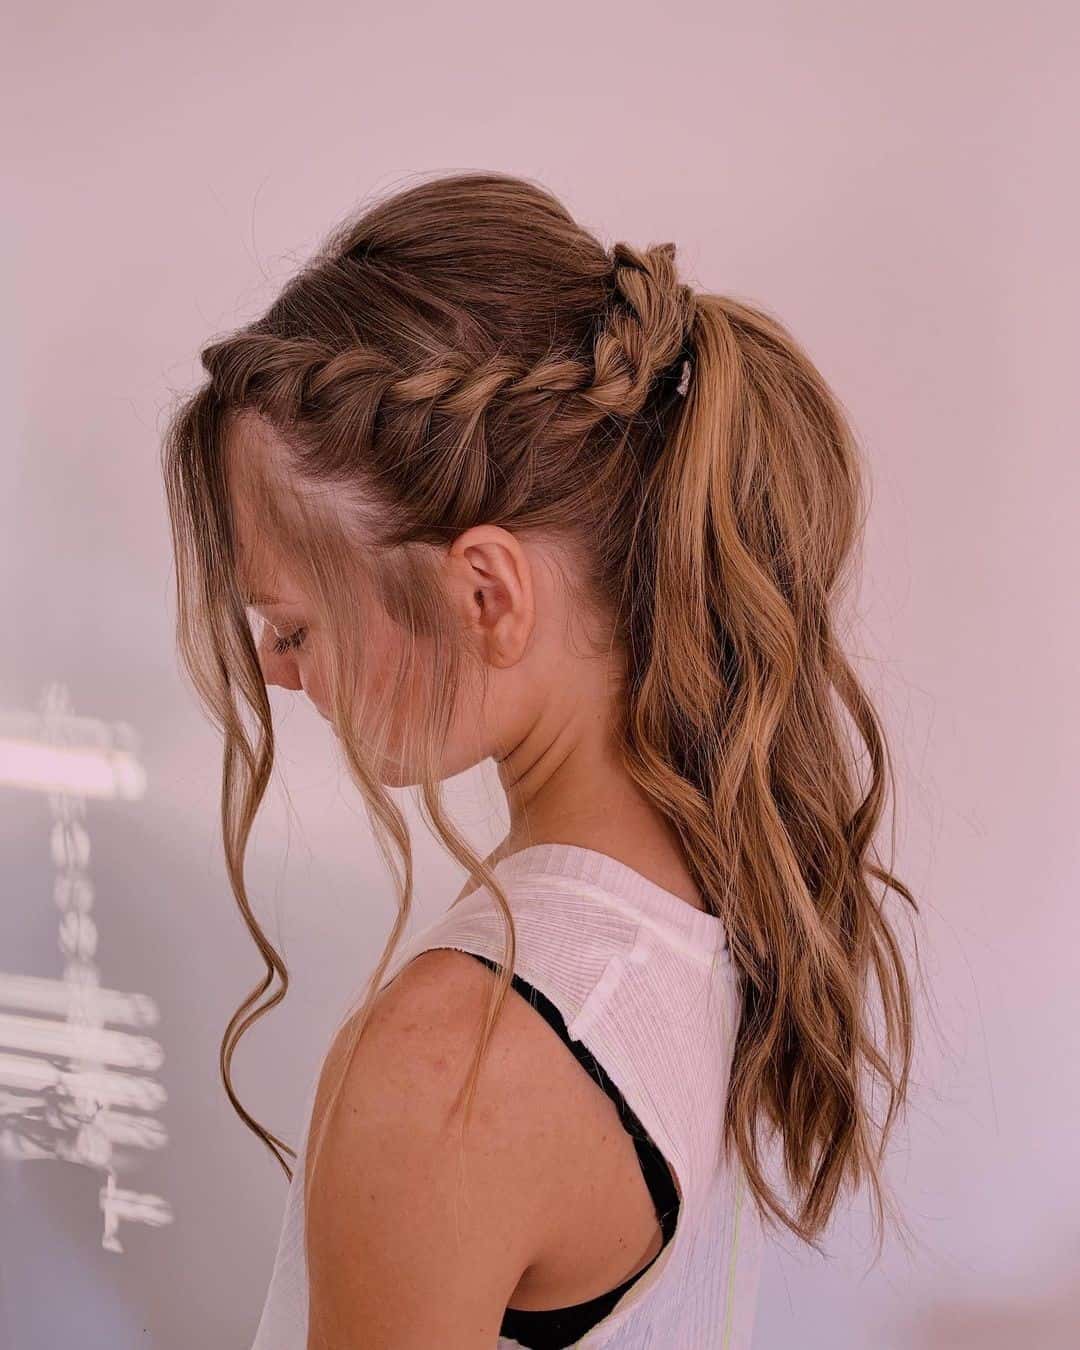 Details 88 Easy Messy Ponytail Hairstyles Ineteachers